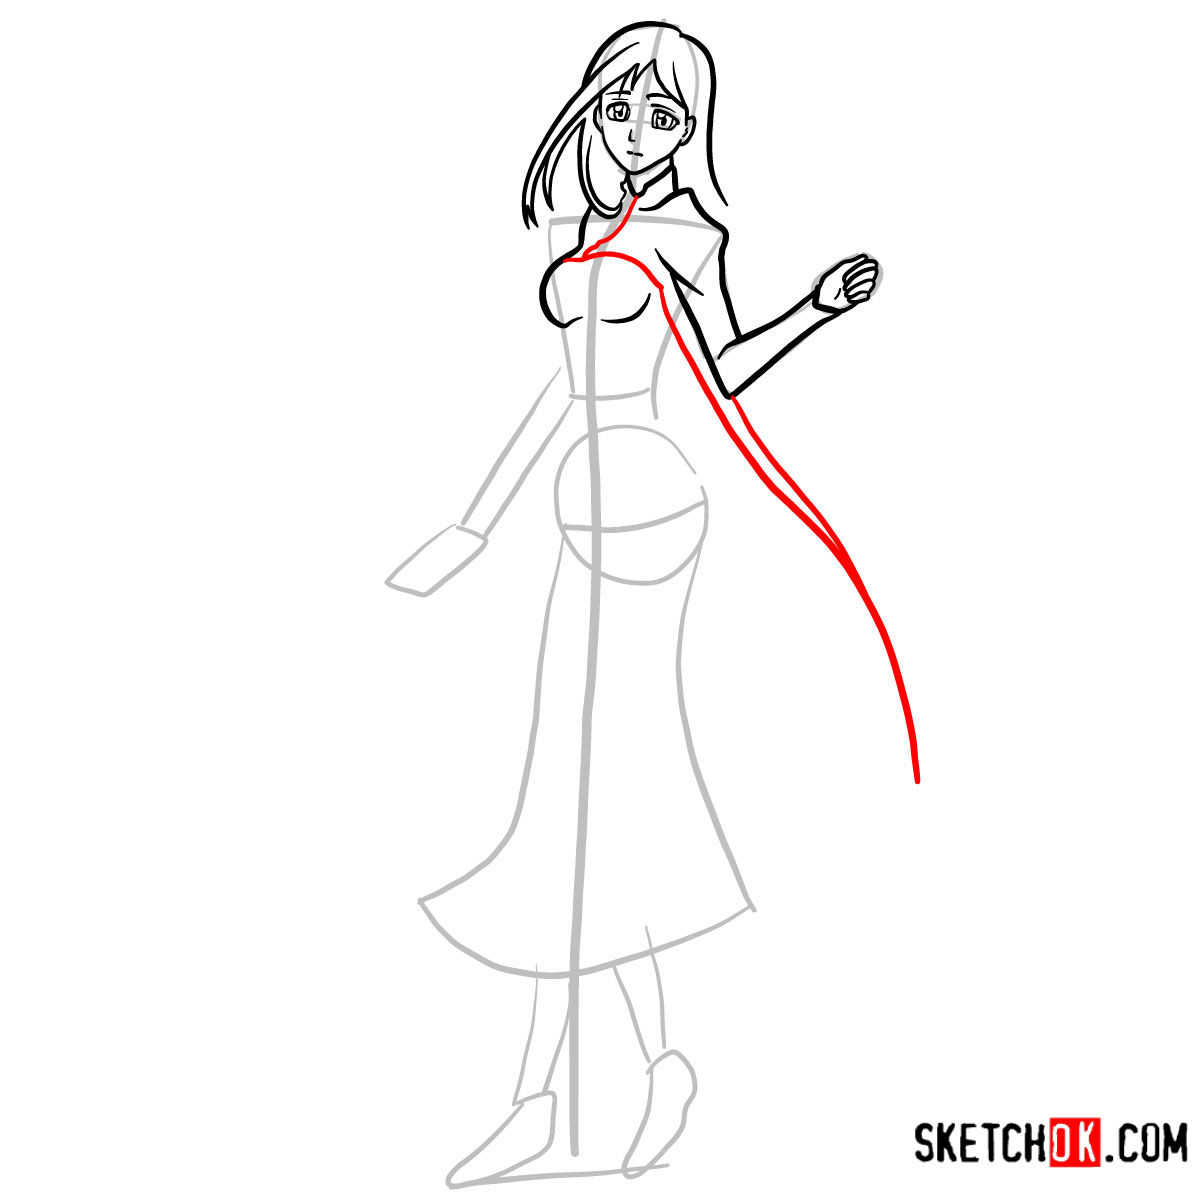 How to draw Orihime Inoue full growth | Bleach - step 08